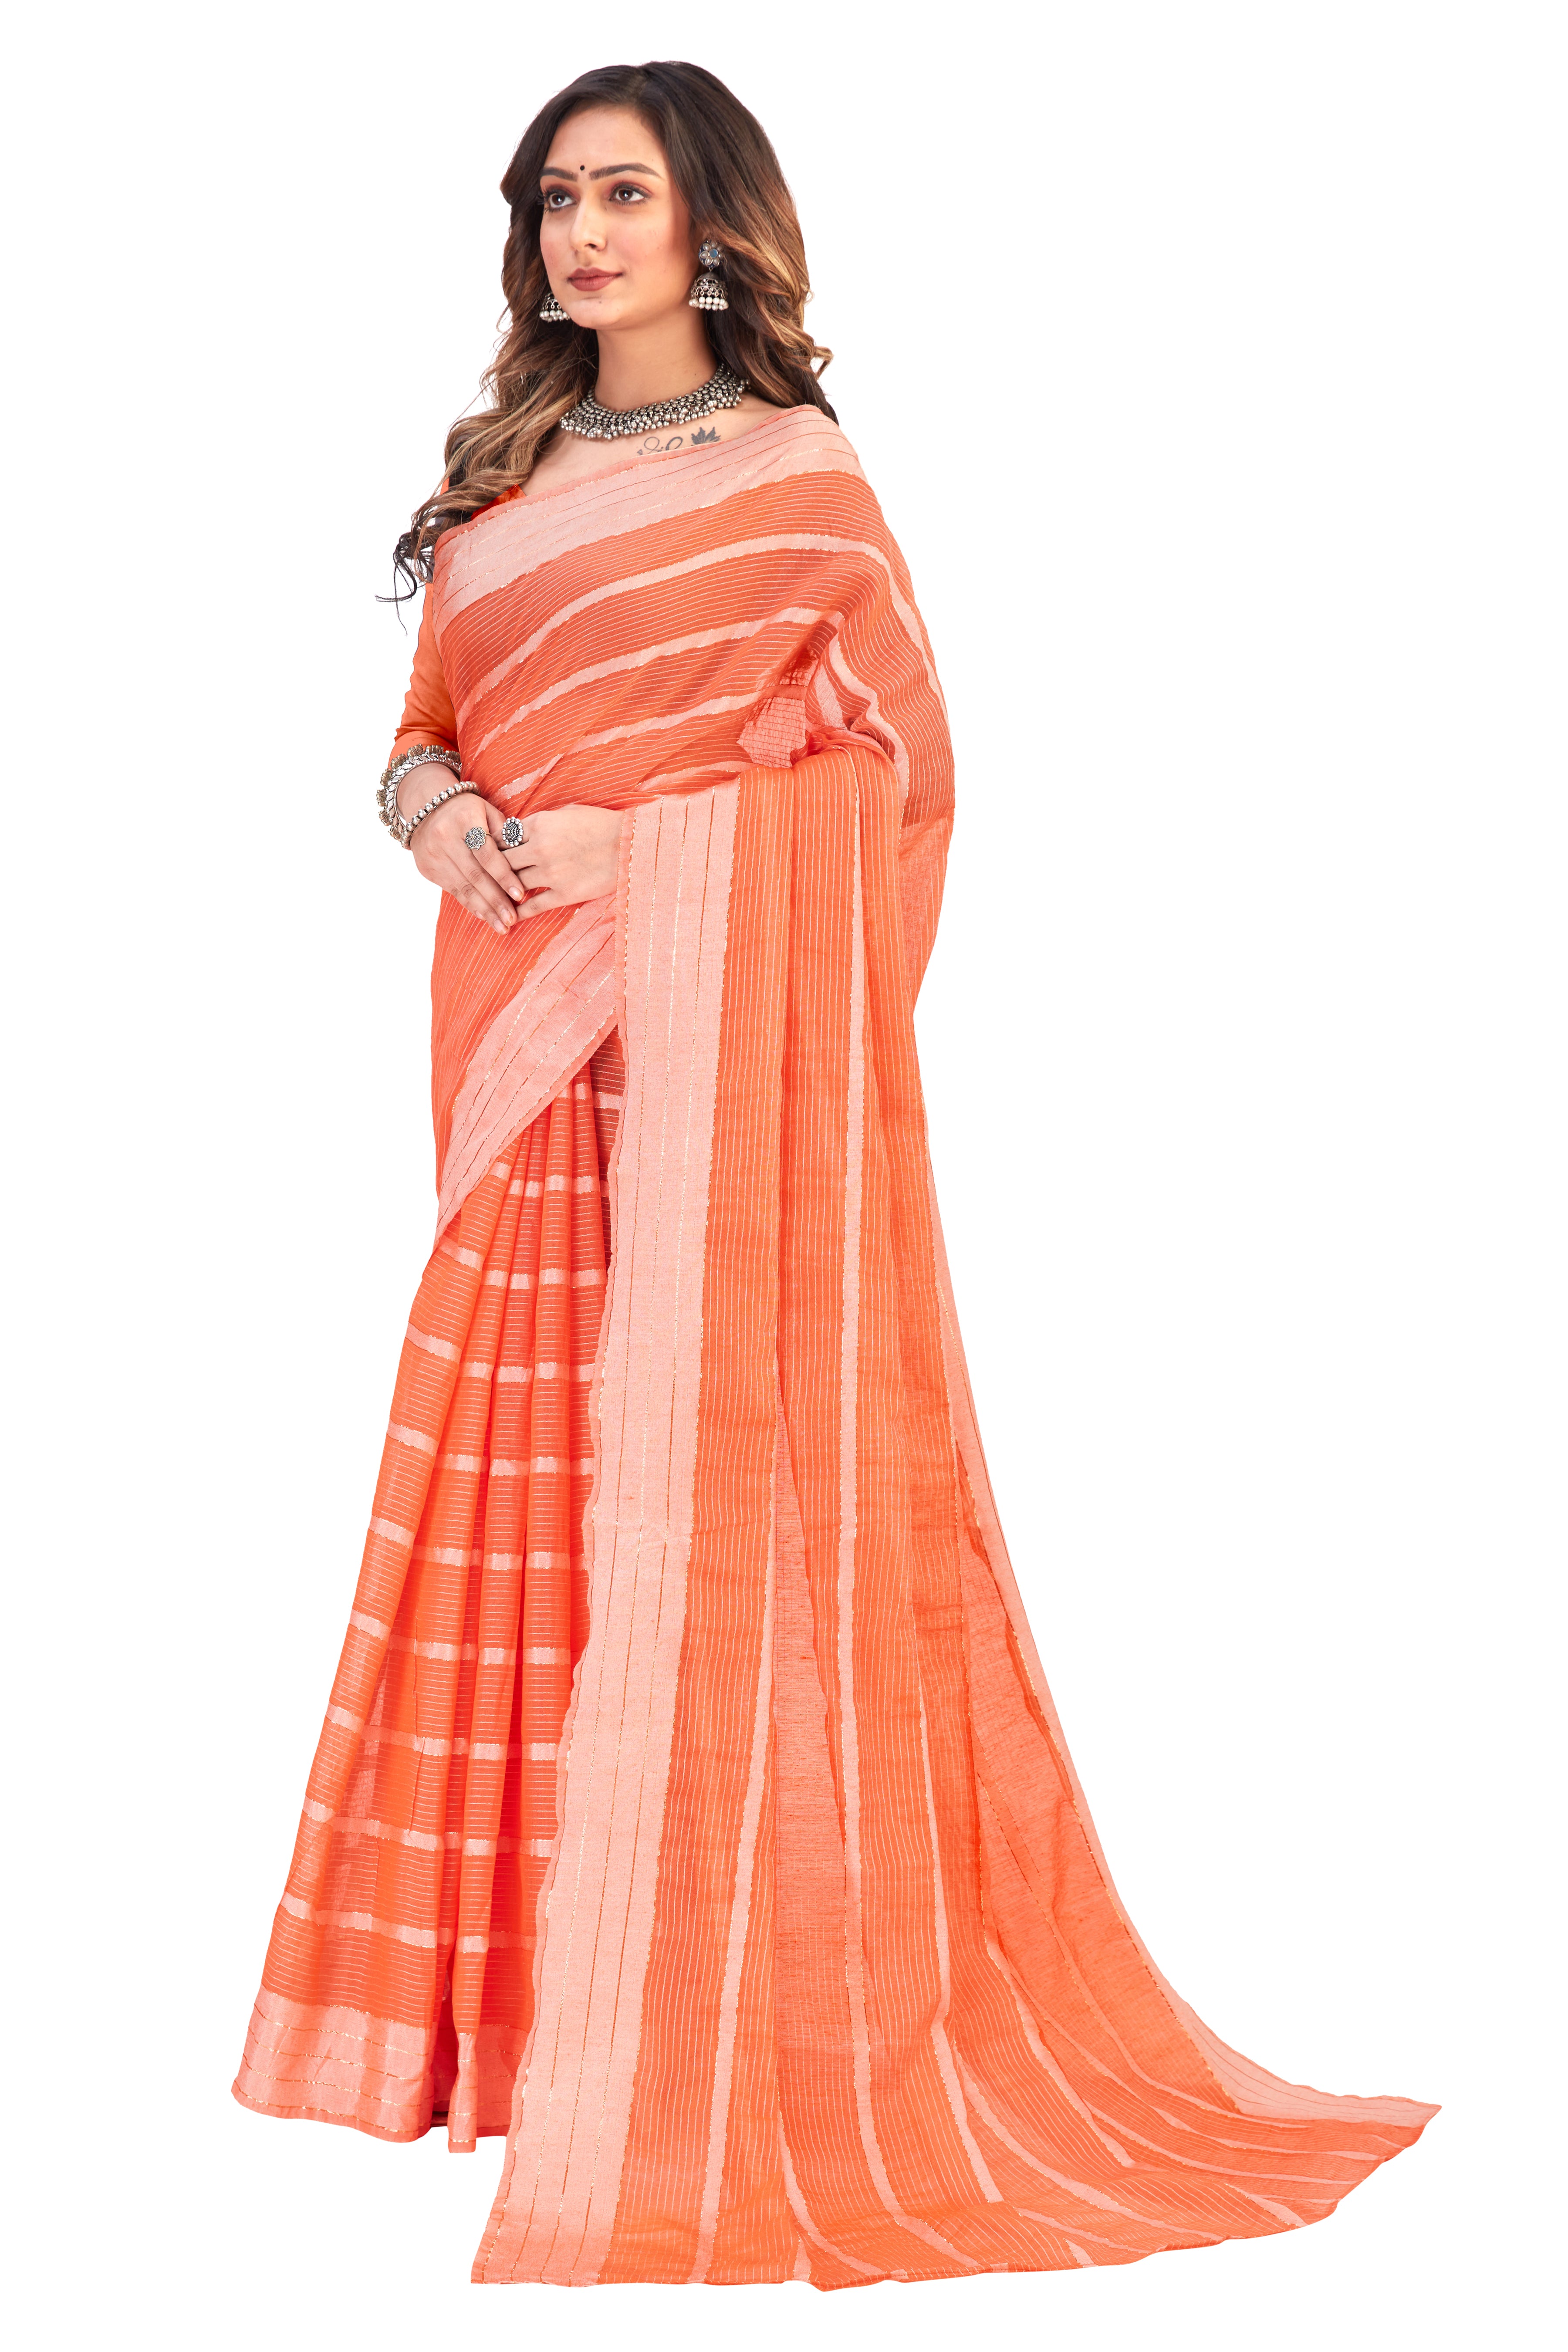 Women's self Woven striped Daily Wear Cotton Blend Sari With Blouse Piece (Orange) - NIMIDHYA